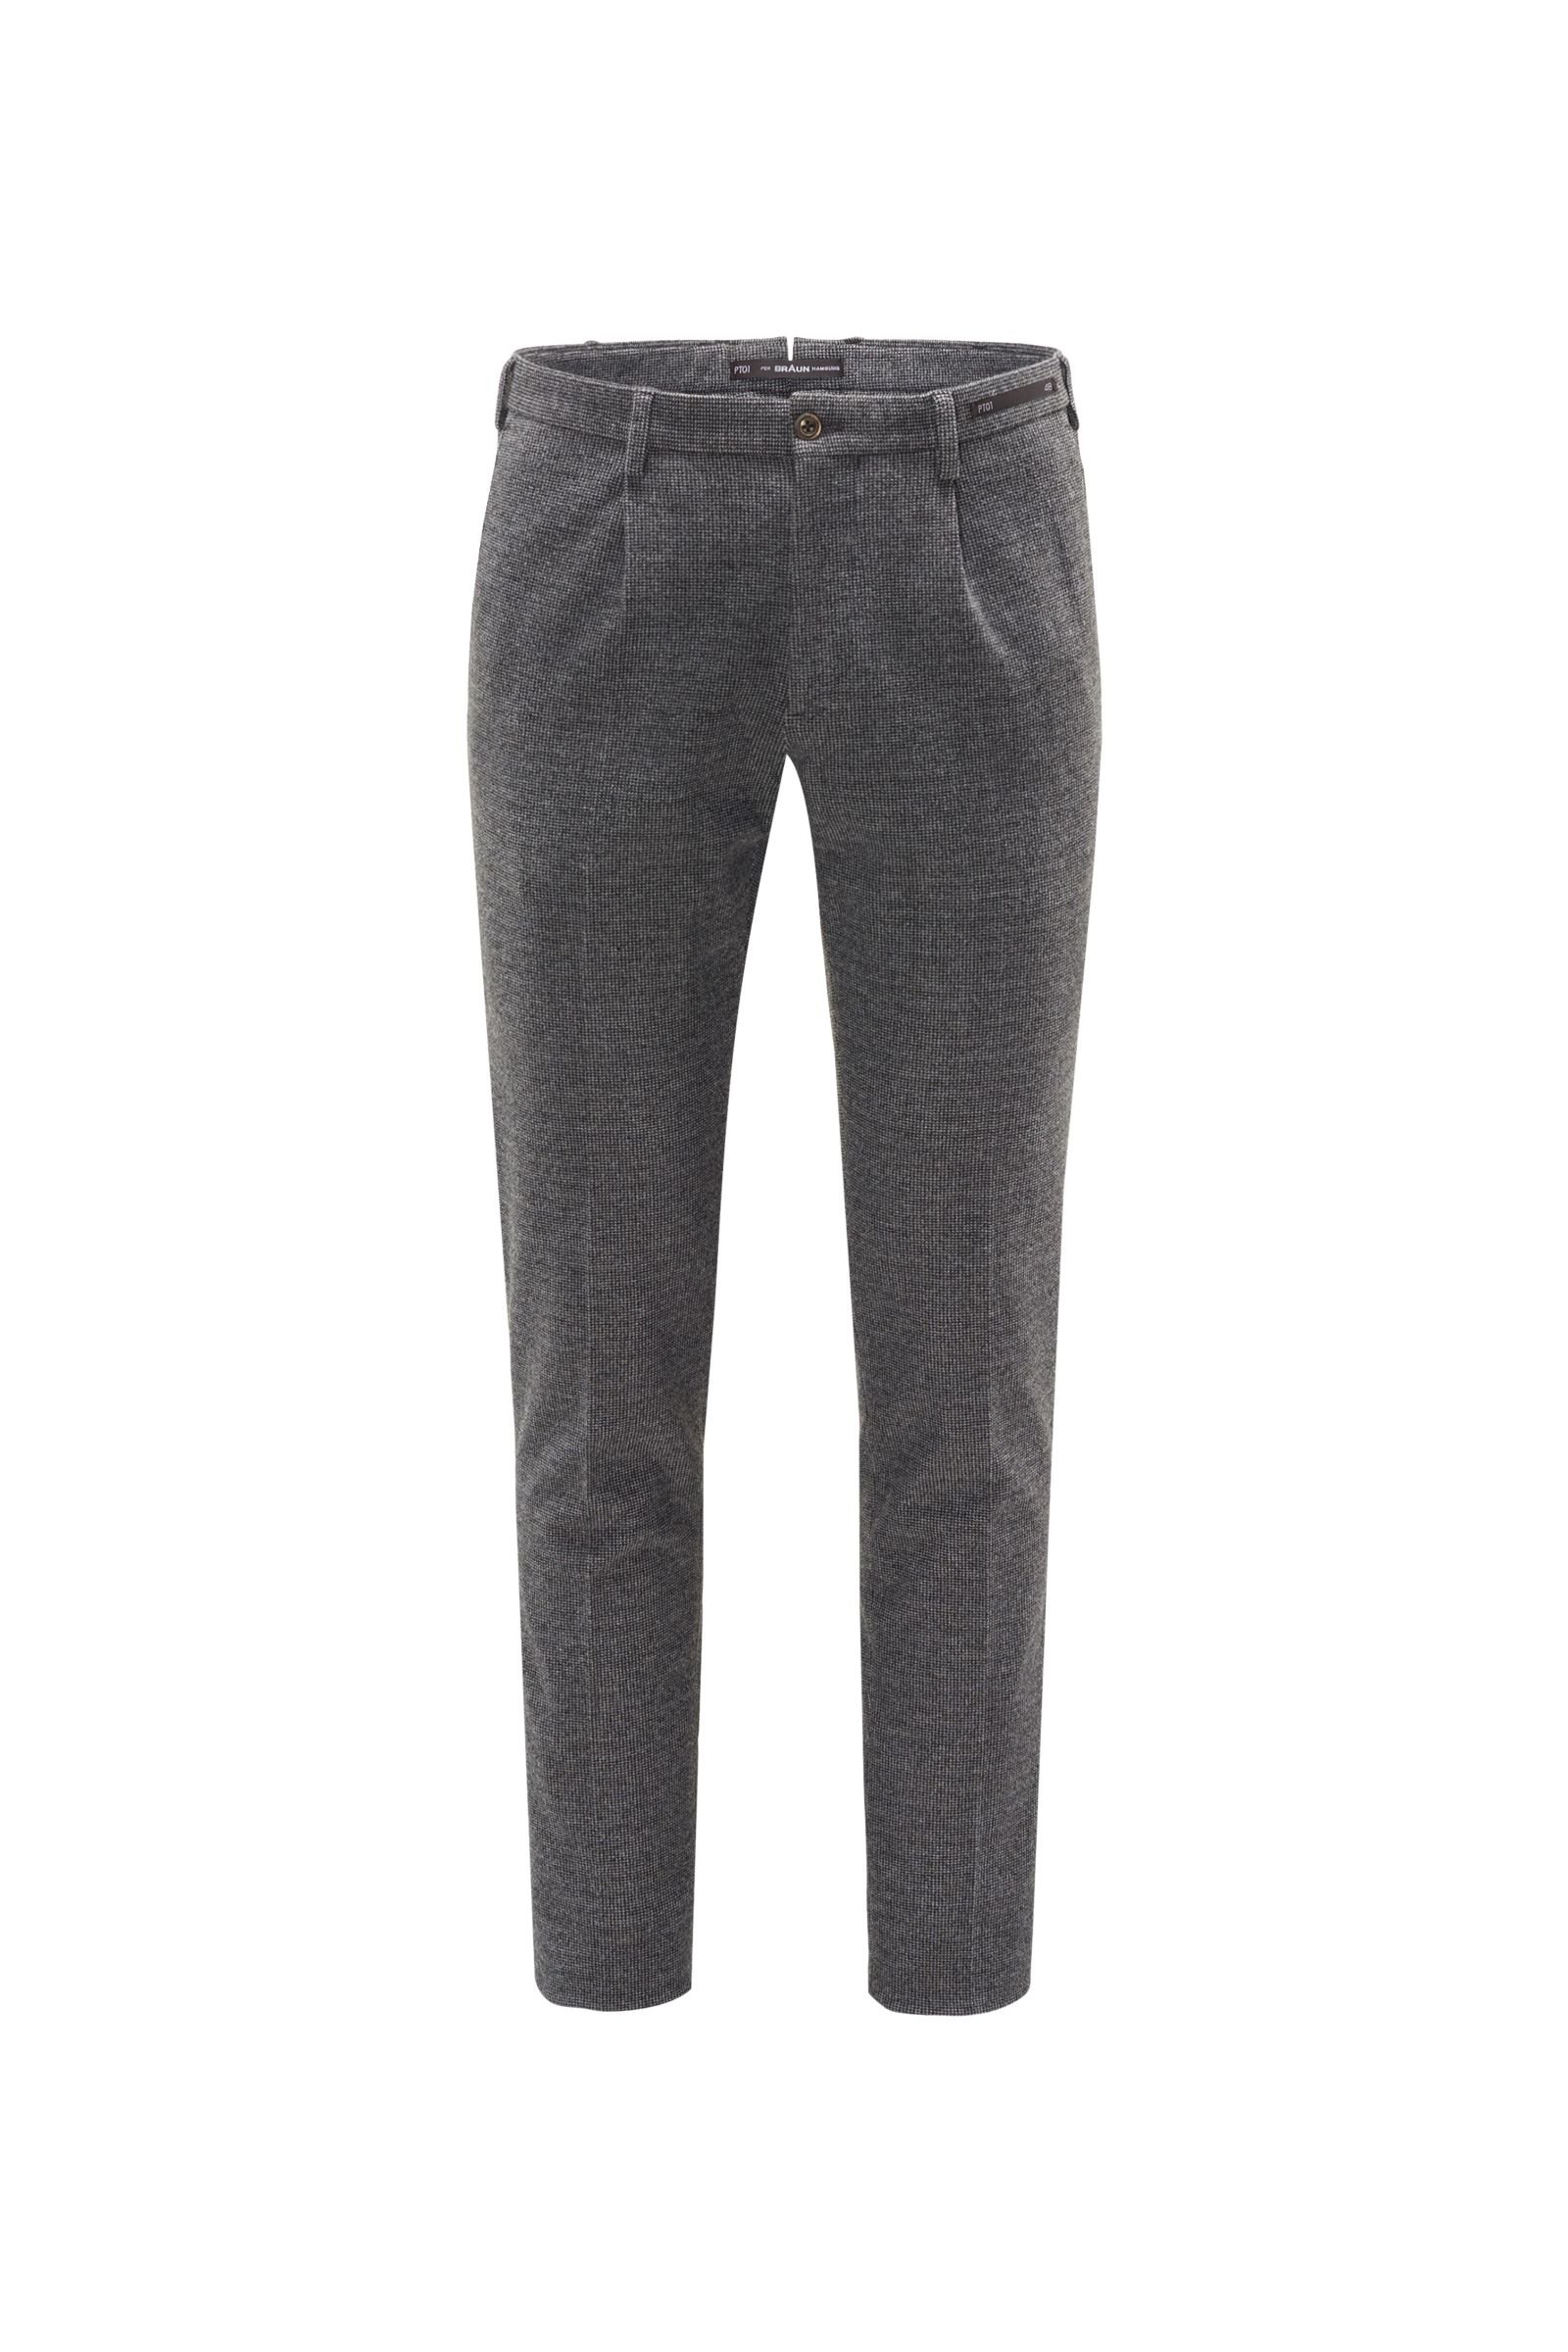 Flannel trousers 'Preppy Fit' grey patterned